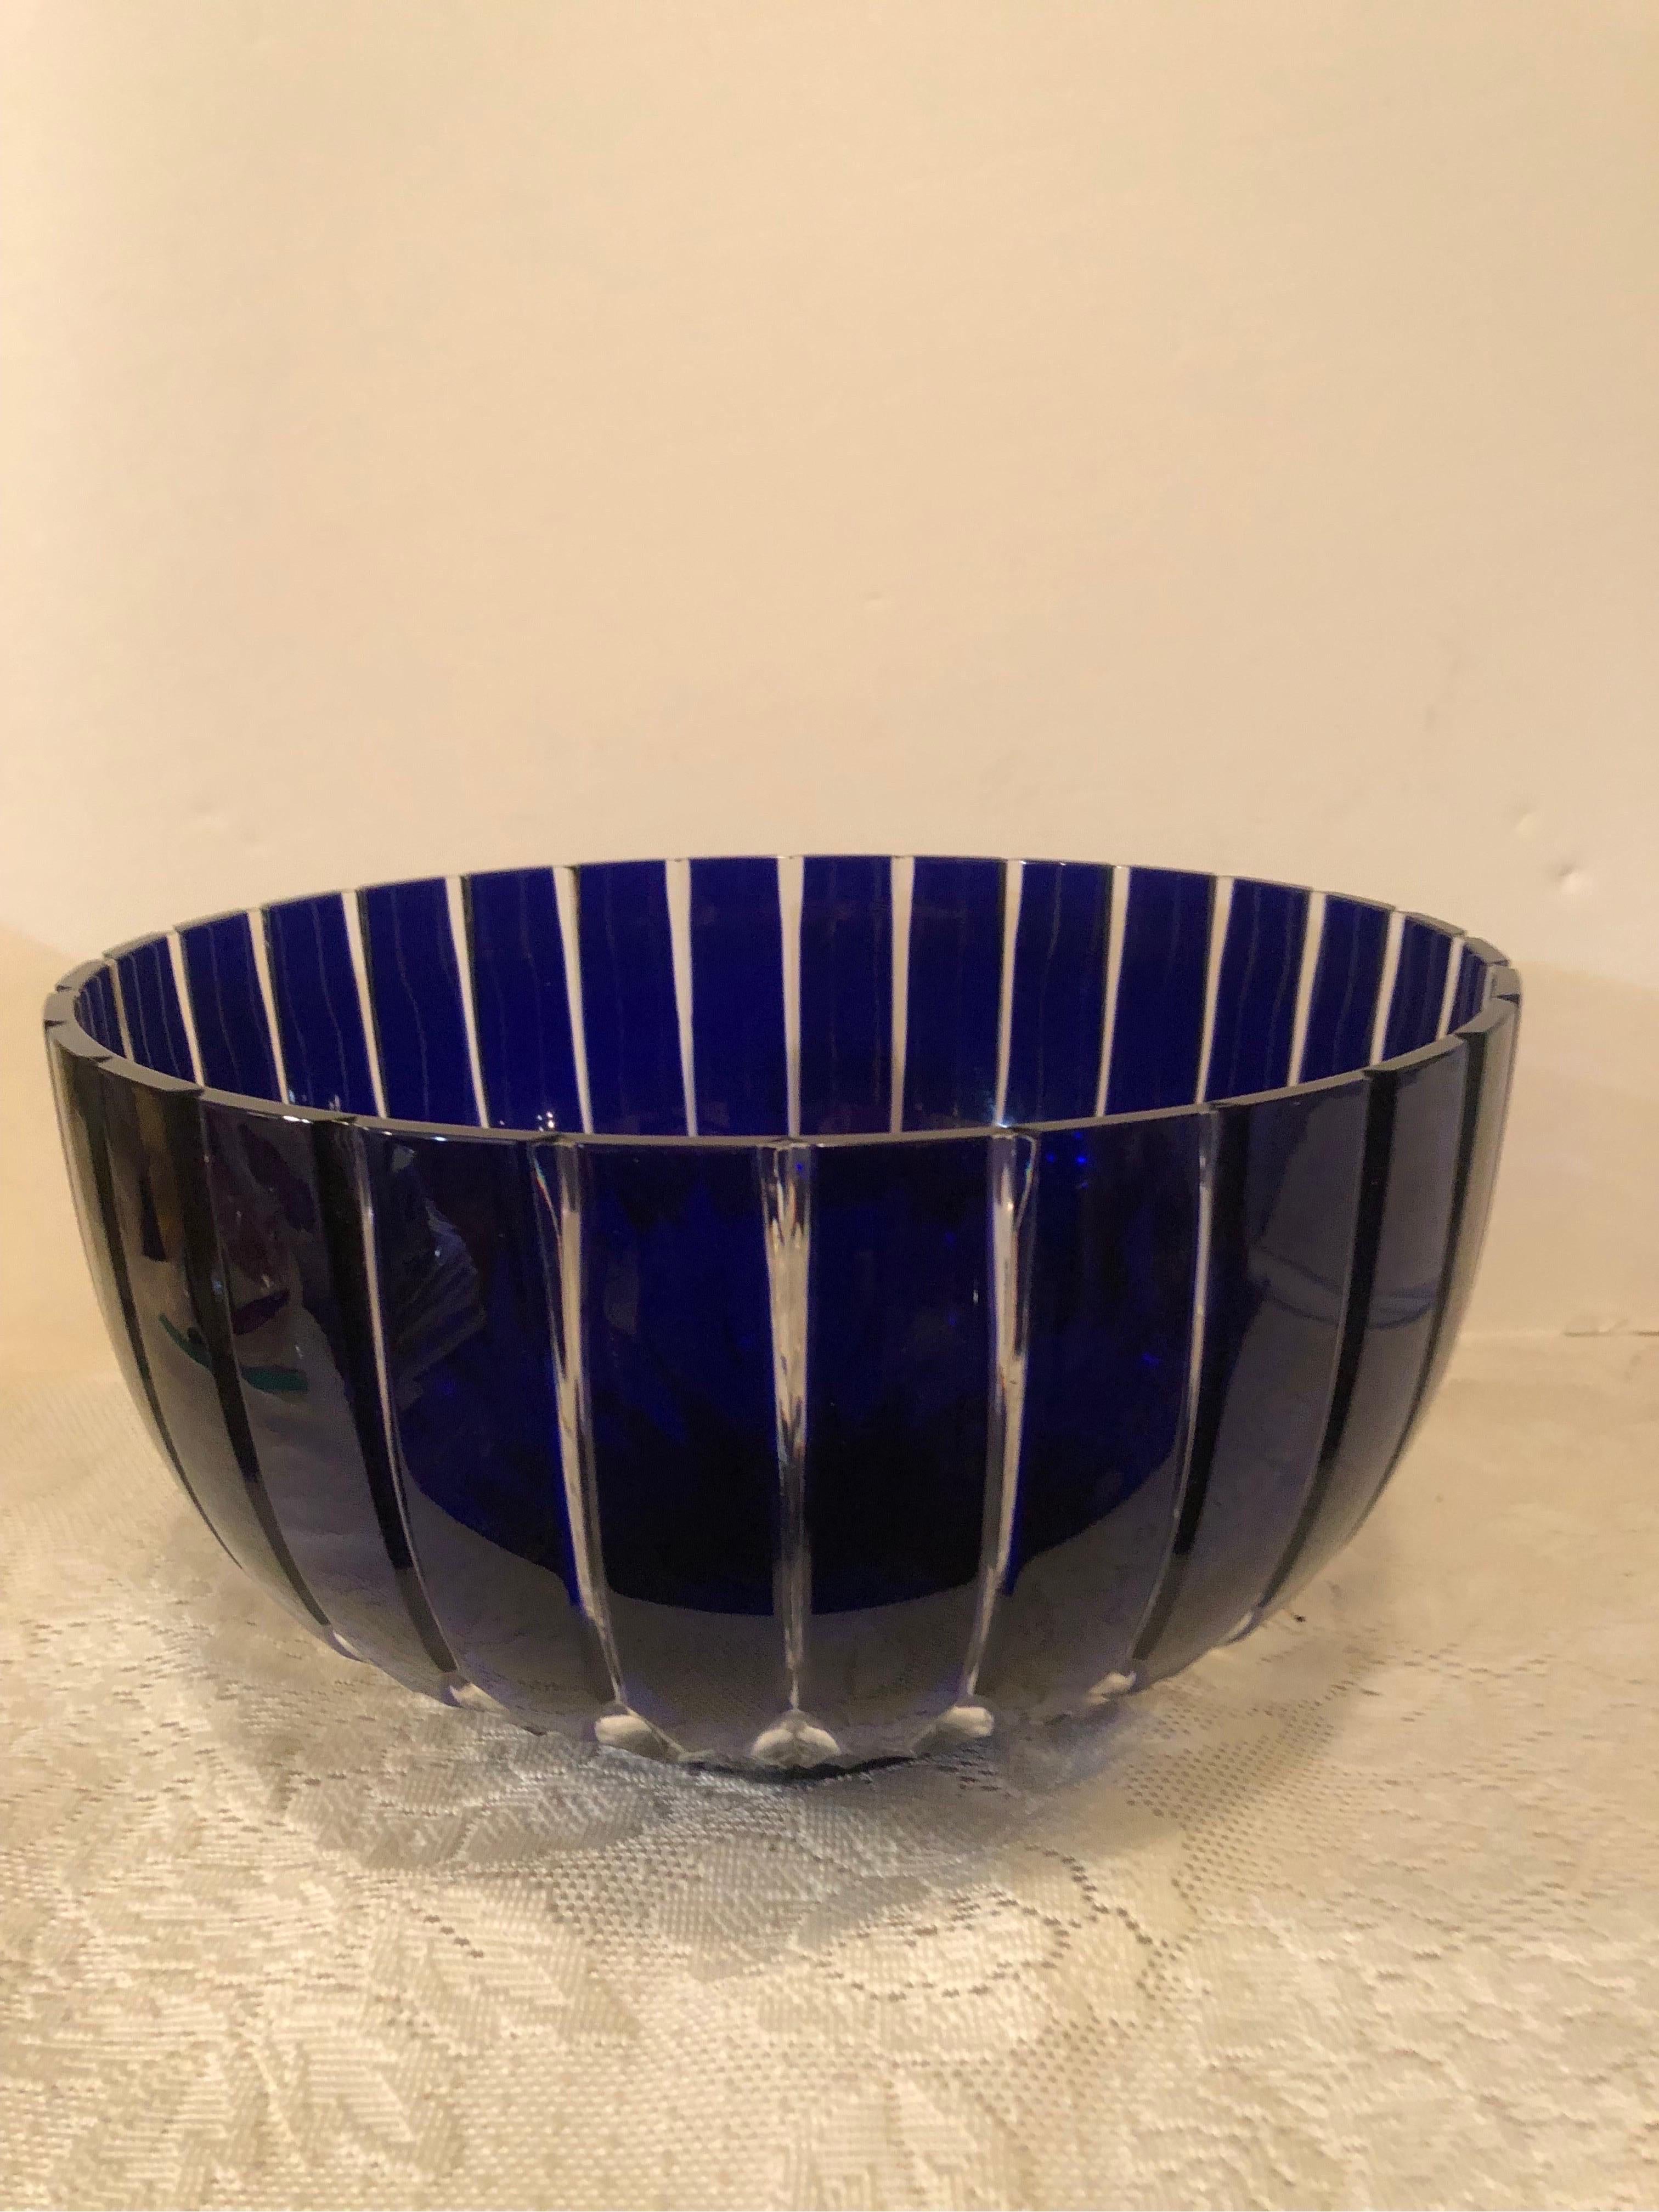 This is an absolutely gorgeous cobalt Bohemian glass crystal cut punch bowl or centerpiece bowl. It is really a stunning presentation piece to decorate your home. The cobalt blue color and the cut of this crystal Bohemian glass bowl makes it very